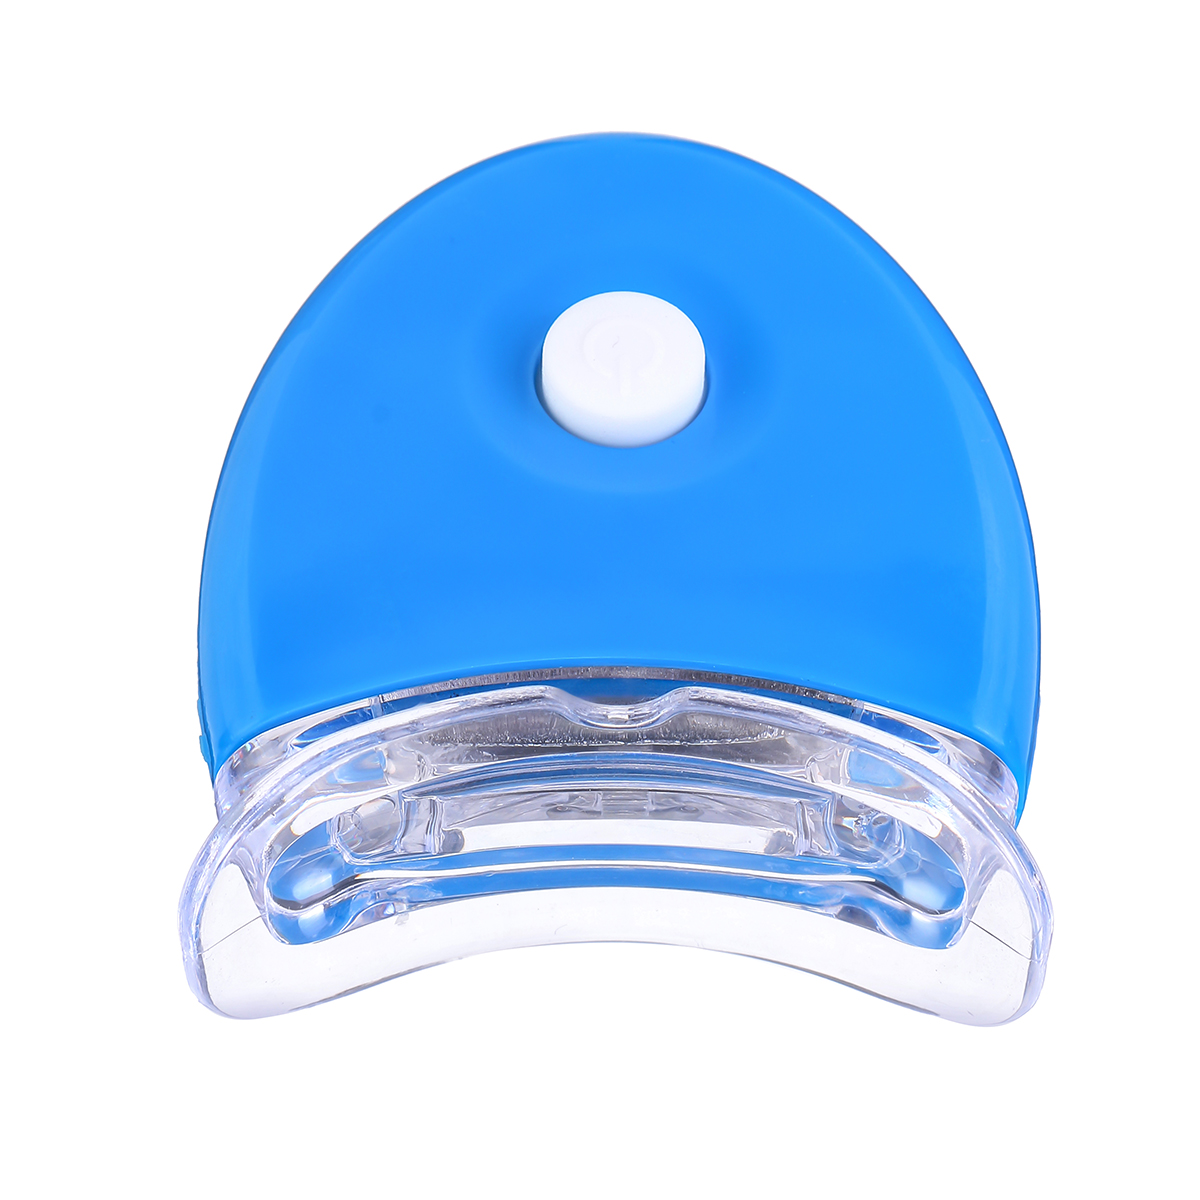 Teeth Whitening Tooth Whitener Care Healthy Dental Mini Home LED Whiten Light Oral Teeth Beauty Instrument Dental Tools